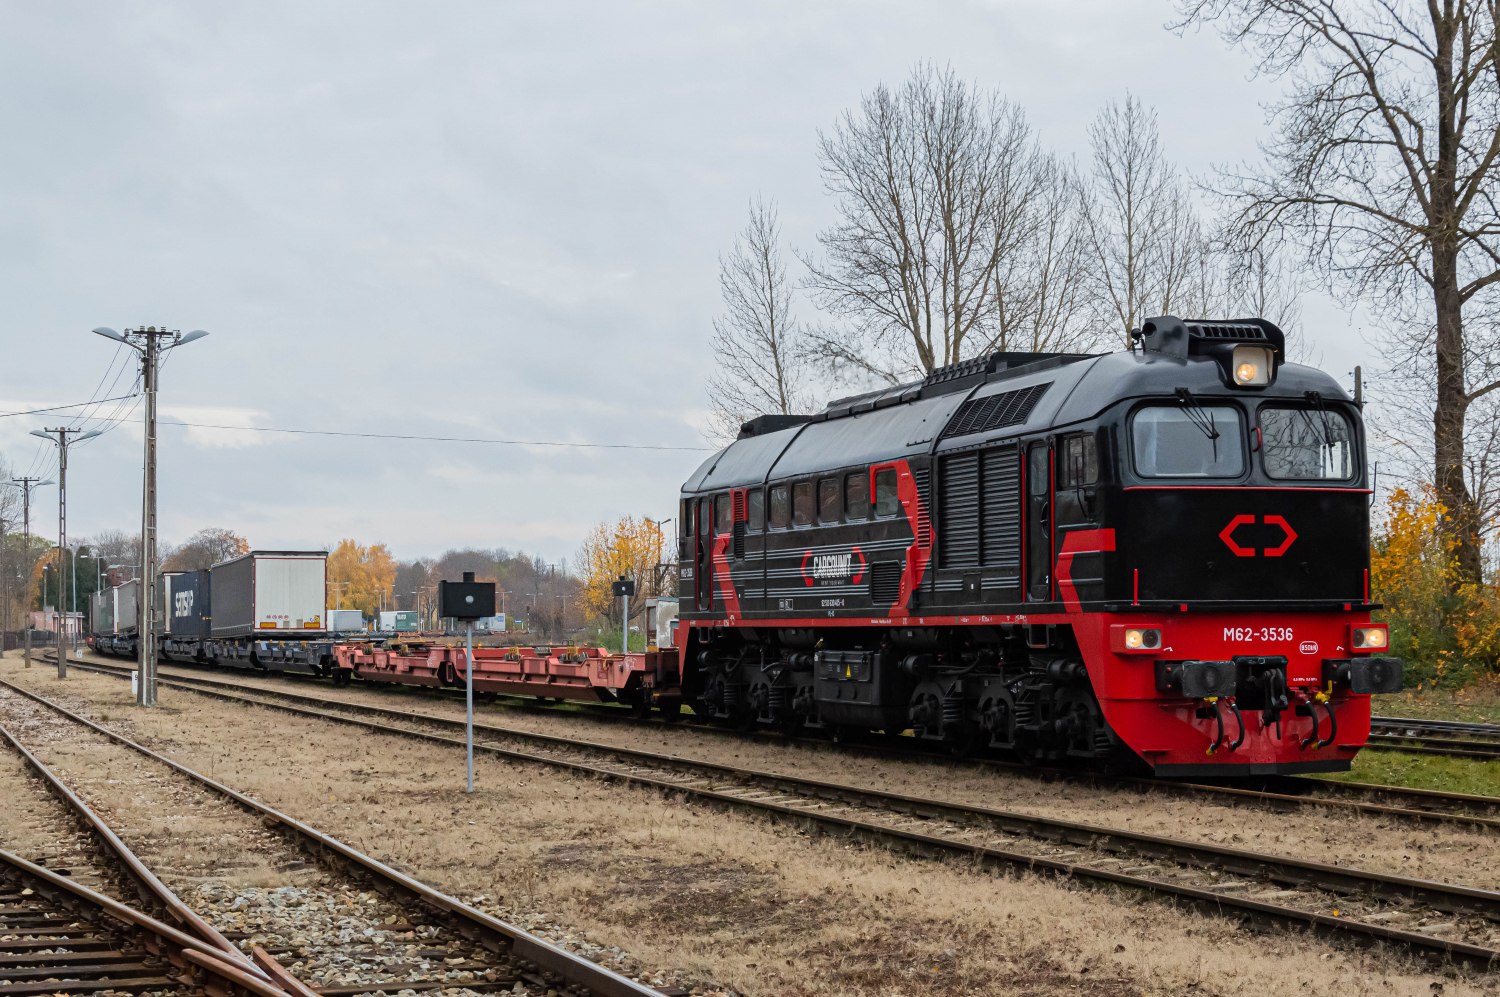 The overhauled M62 mainline locomotive in Cargounit's livery in Poland